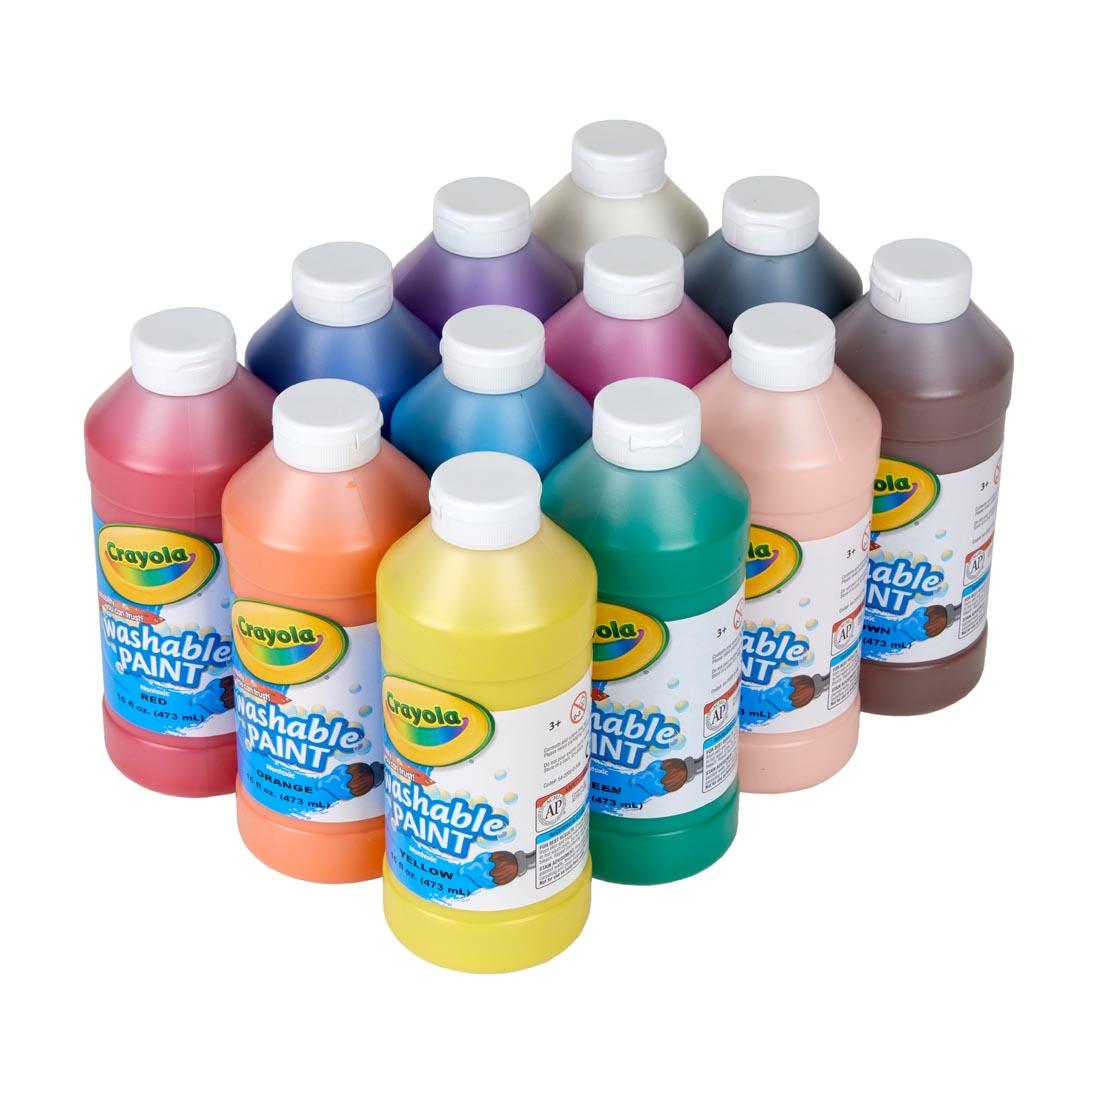 Crayola Washable Paint pints in 12 assorted colors